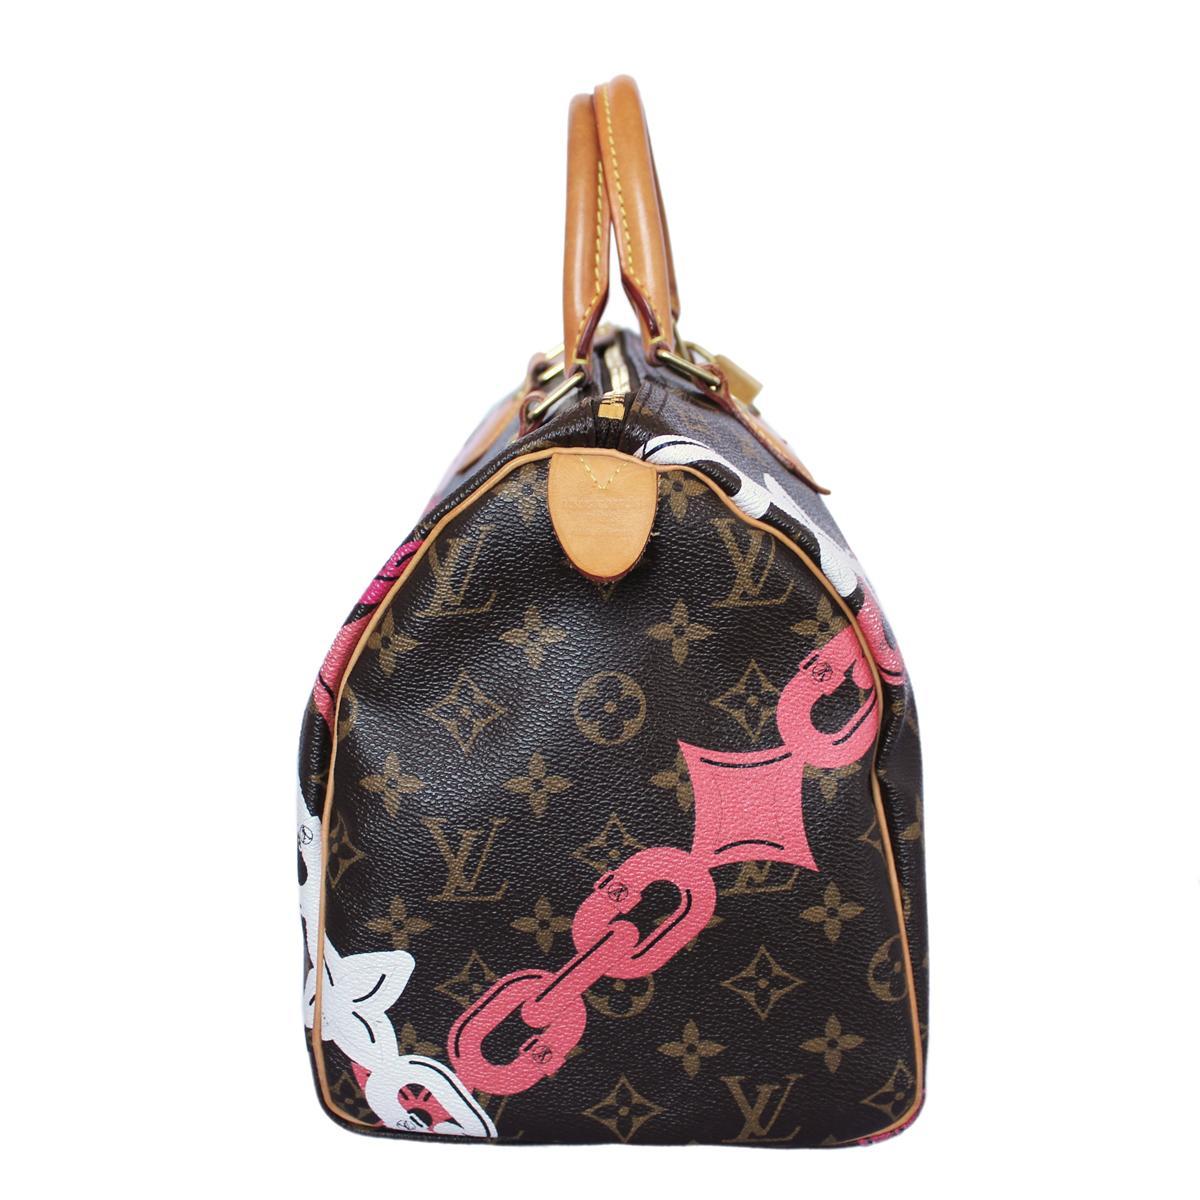 Fantastic bag, limited and exclusive edition
Year 2016
Chain Flower Speedy 30 LImited Edition
Monogram canvas
Vacchetta leather handles
Multicolored pattern
Zip closure
Locker and keys
Internal zip pocket
Fuchsia internal color
Cm 30 x 26 x 18 (11.8